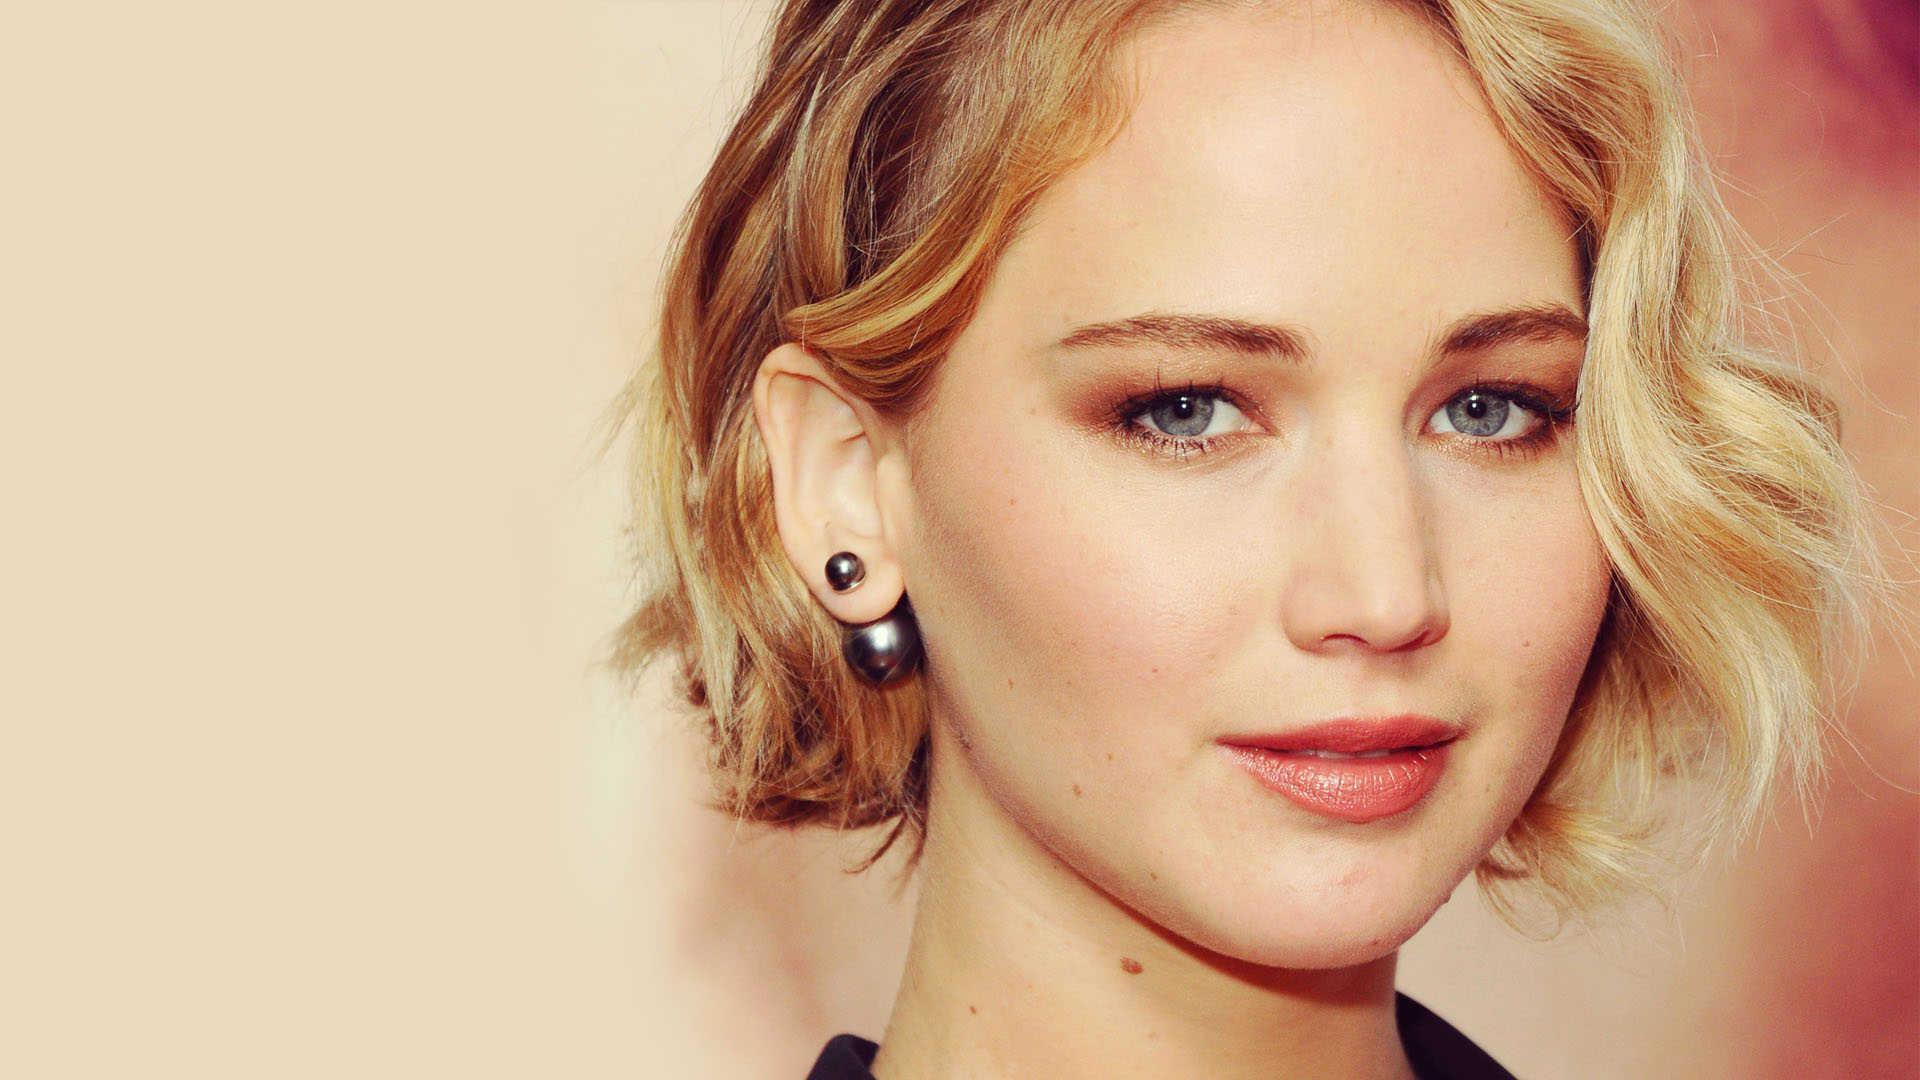 Jennifer Lawrence Wallpaper High Resolution and Quality Download